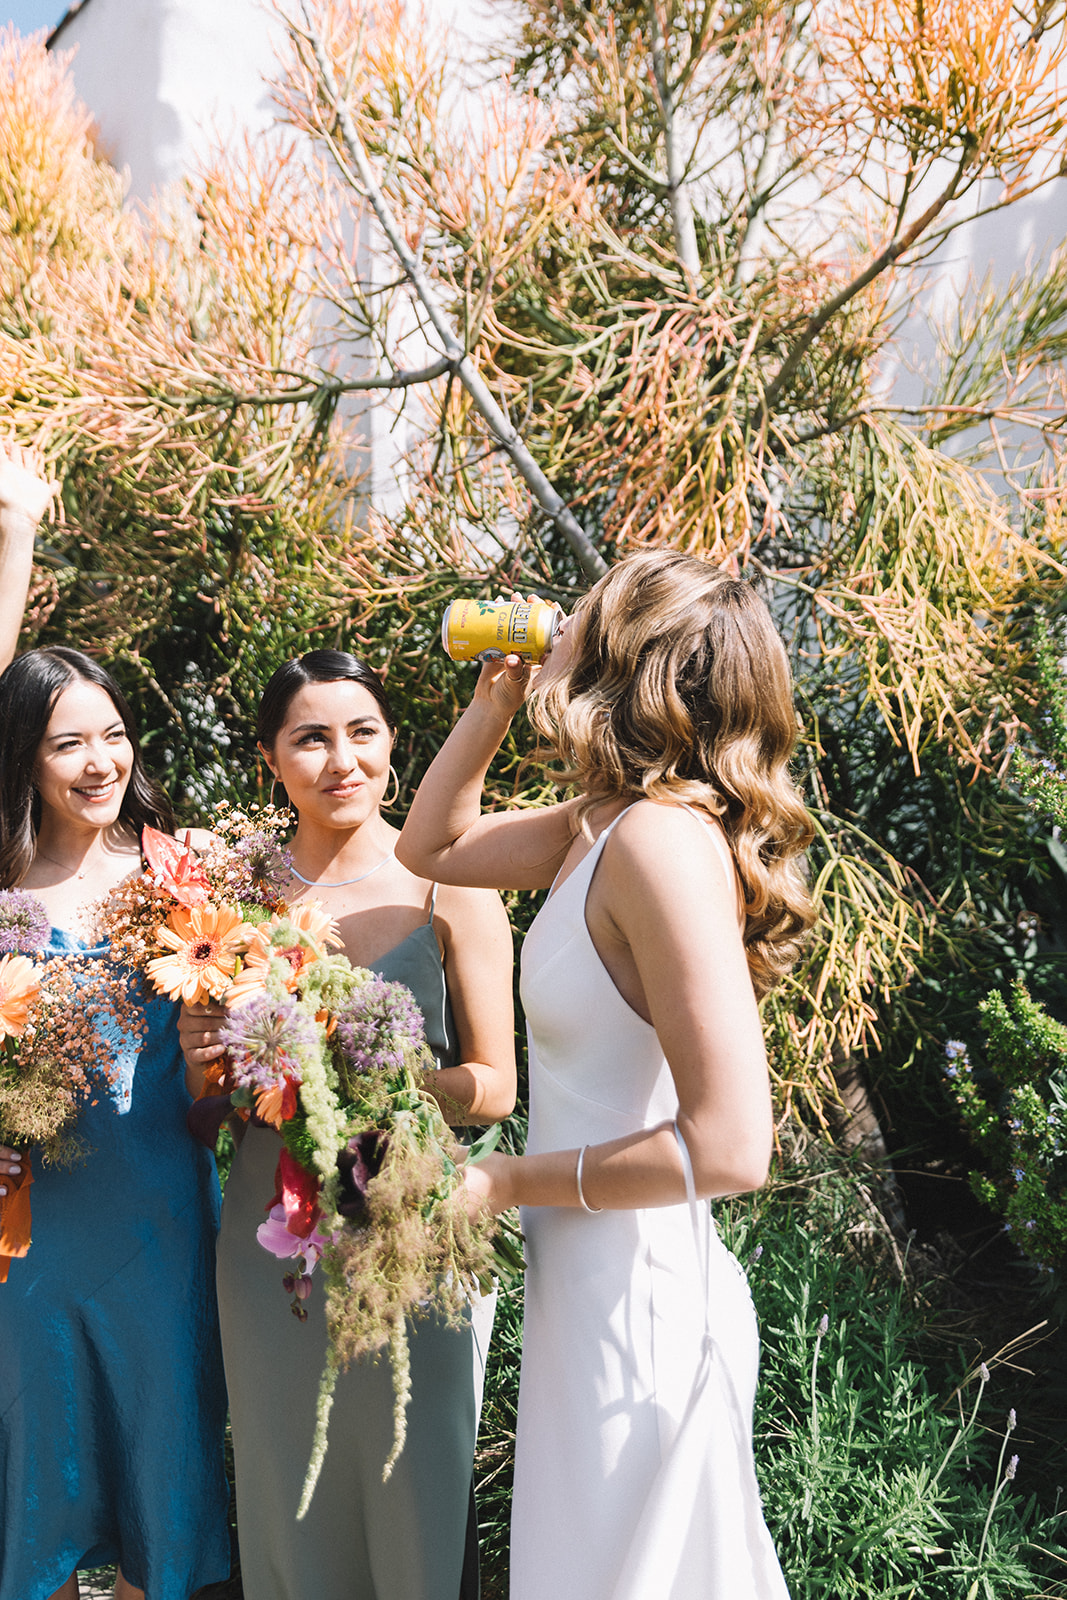 How to enjoy your wedding, make time for fun, untraditional moments with friends